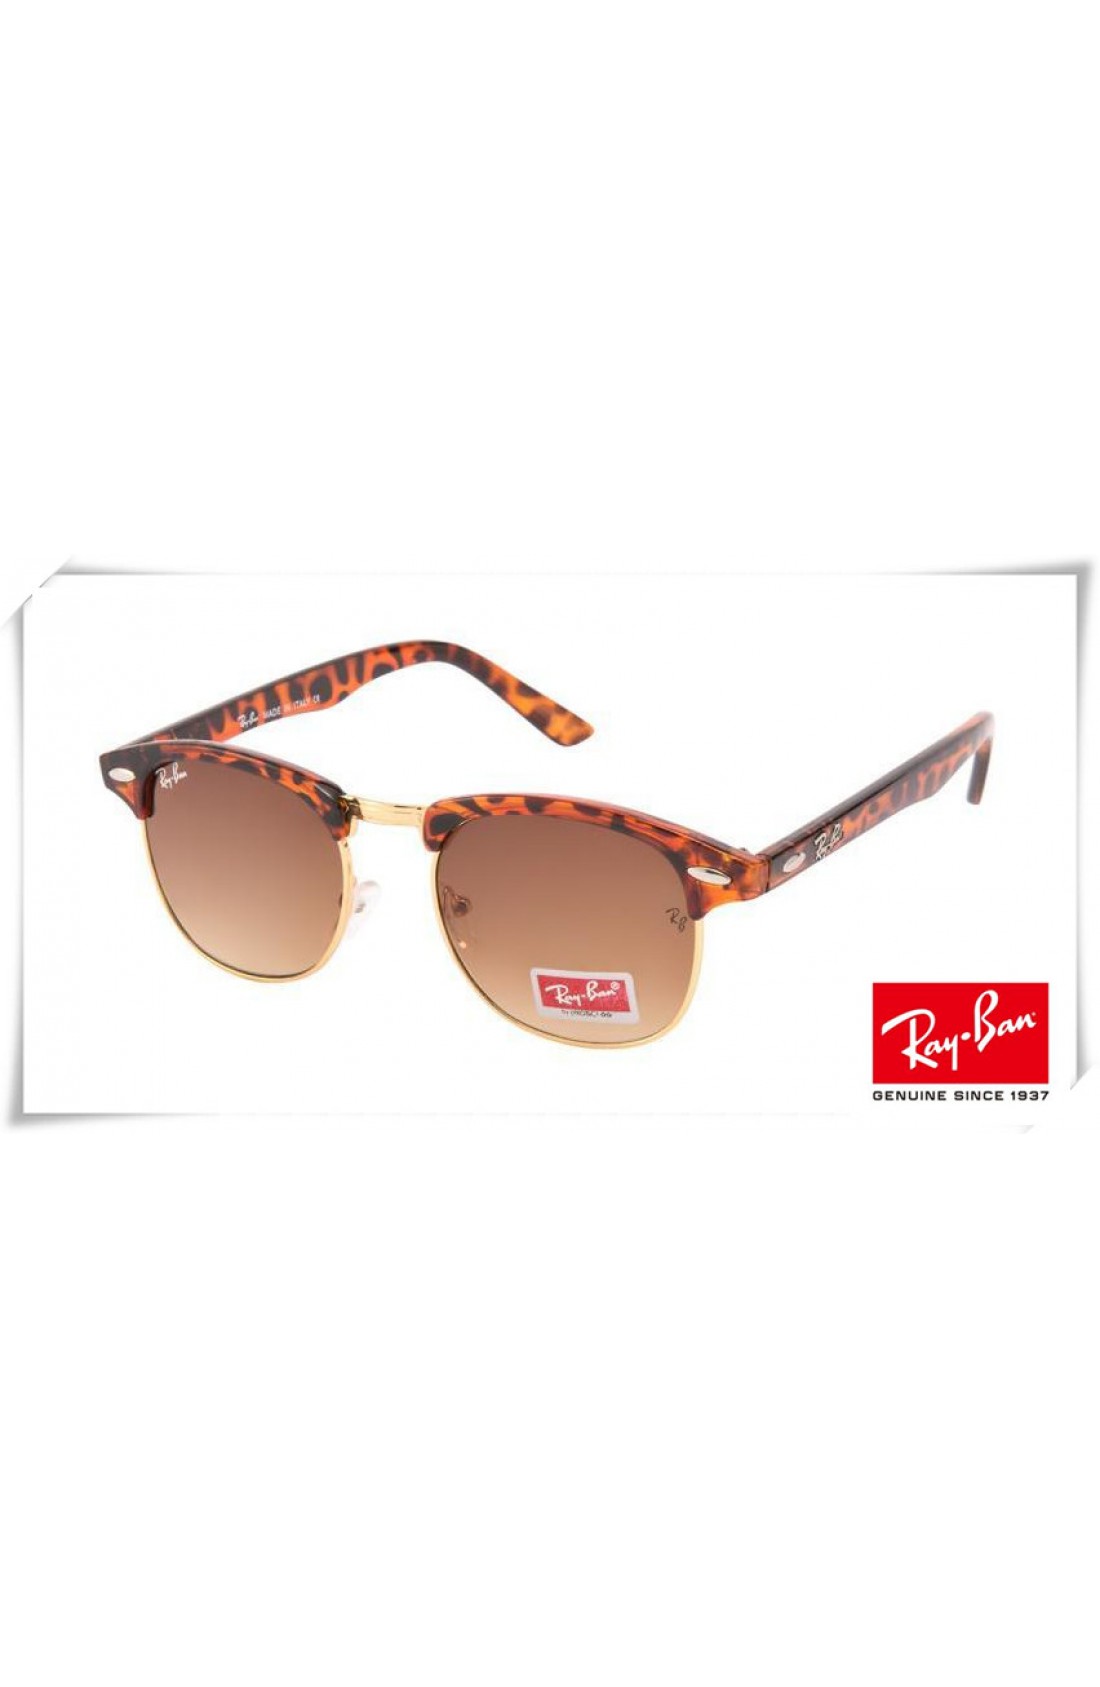 ray ban clubmaster outlet